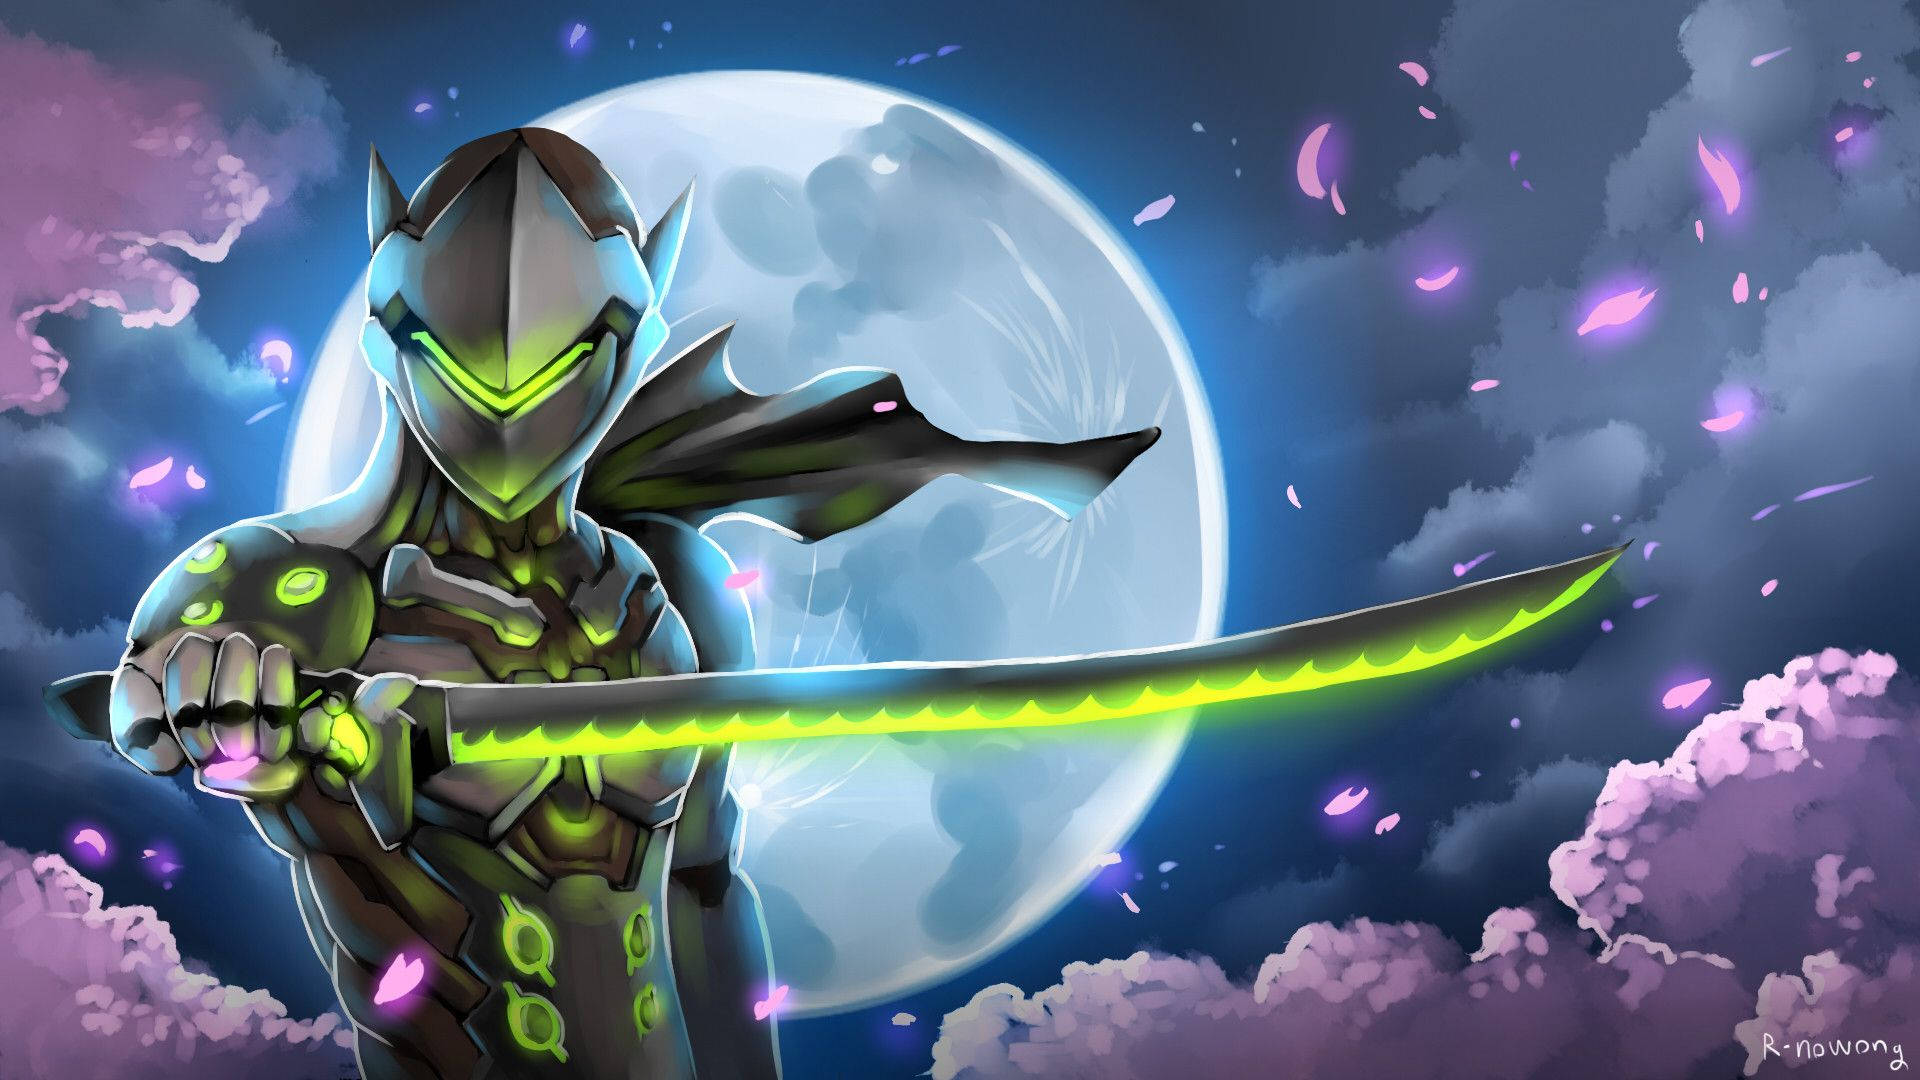 "Cyborg Genji lives on through neon green energy, showing us that there is power in resilience" Wallpaper